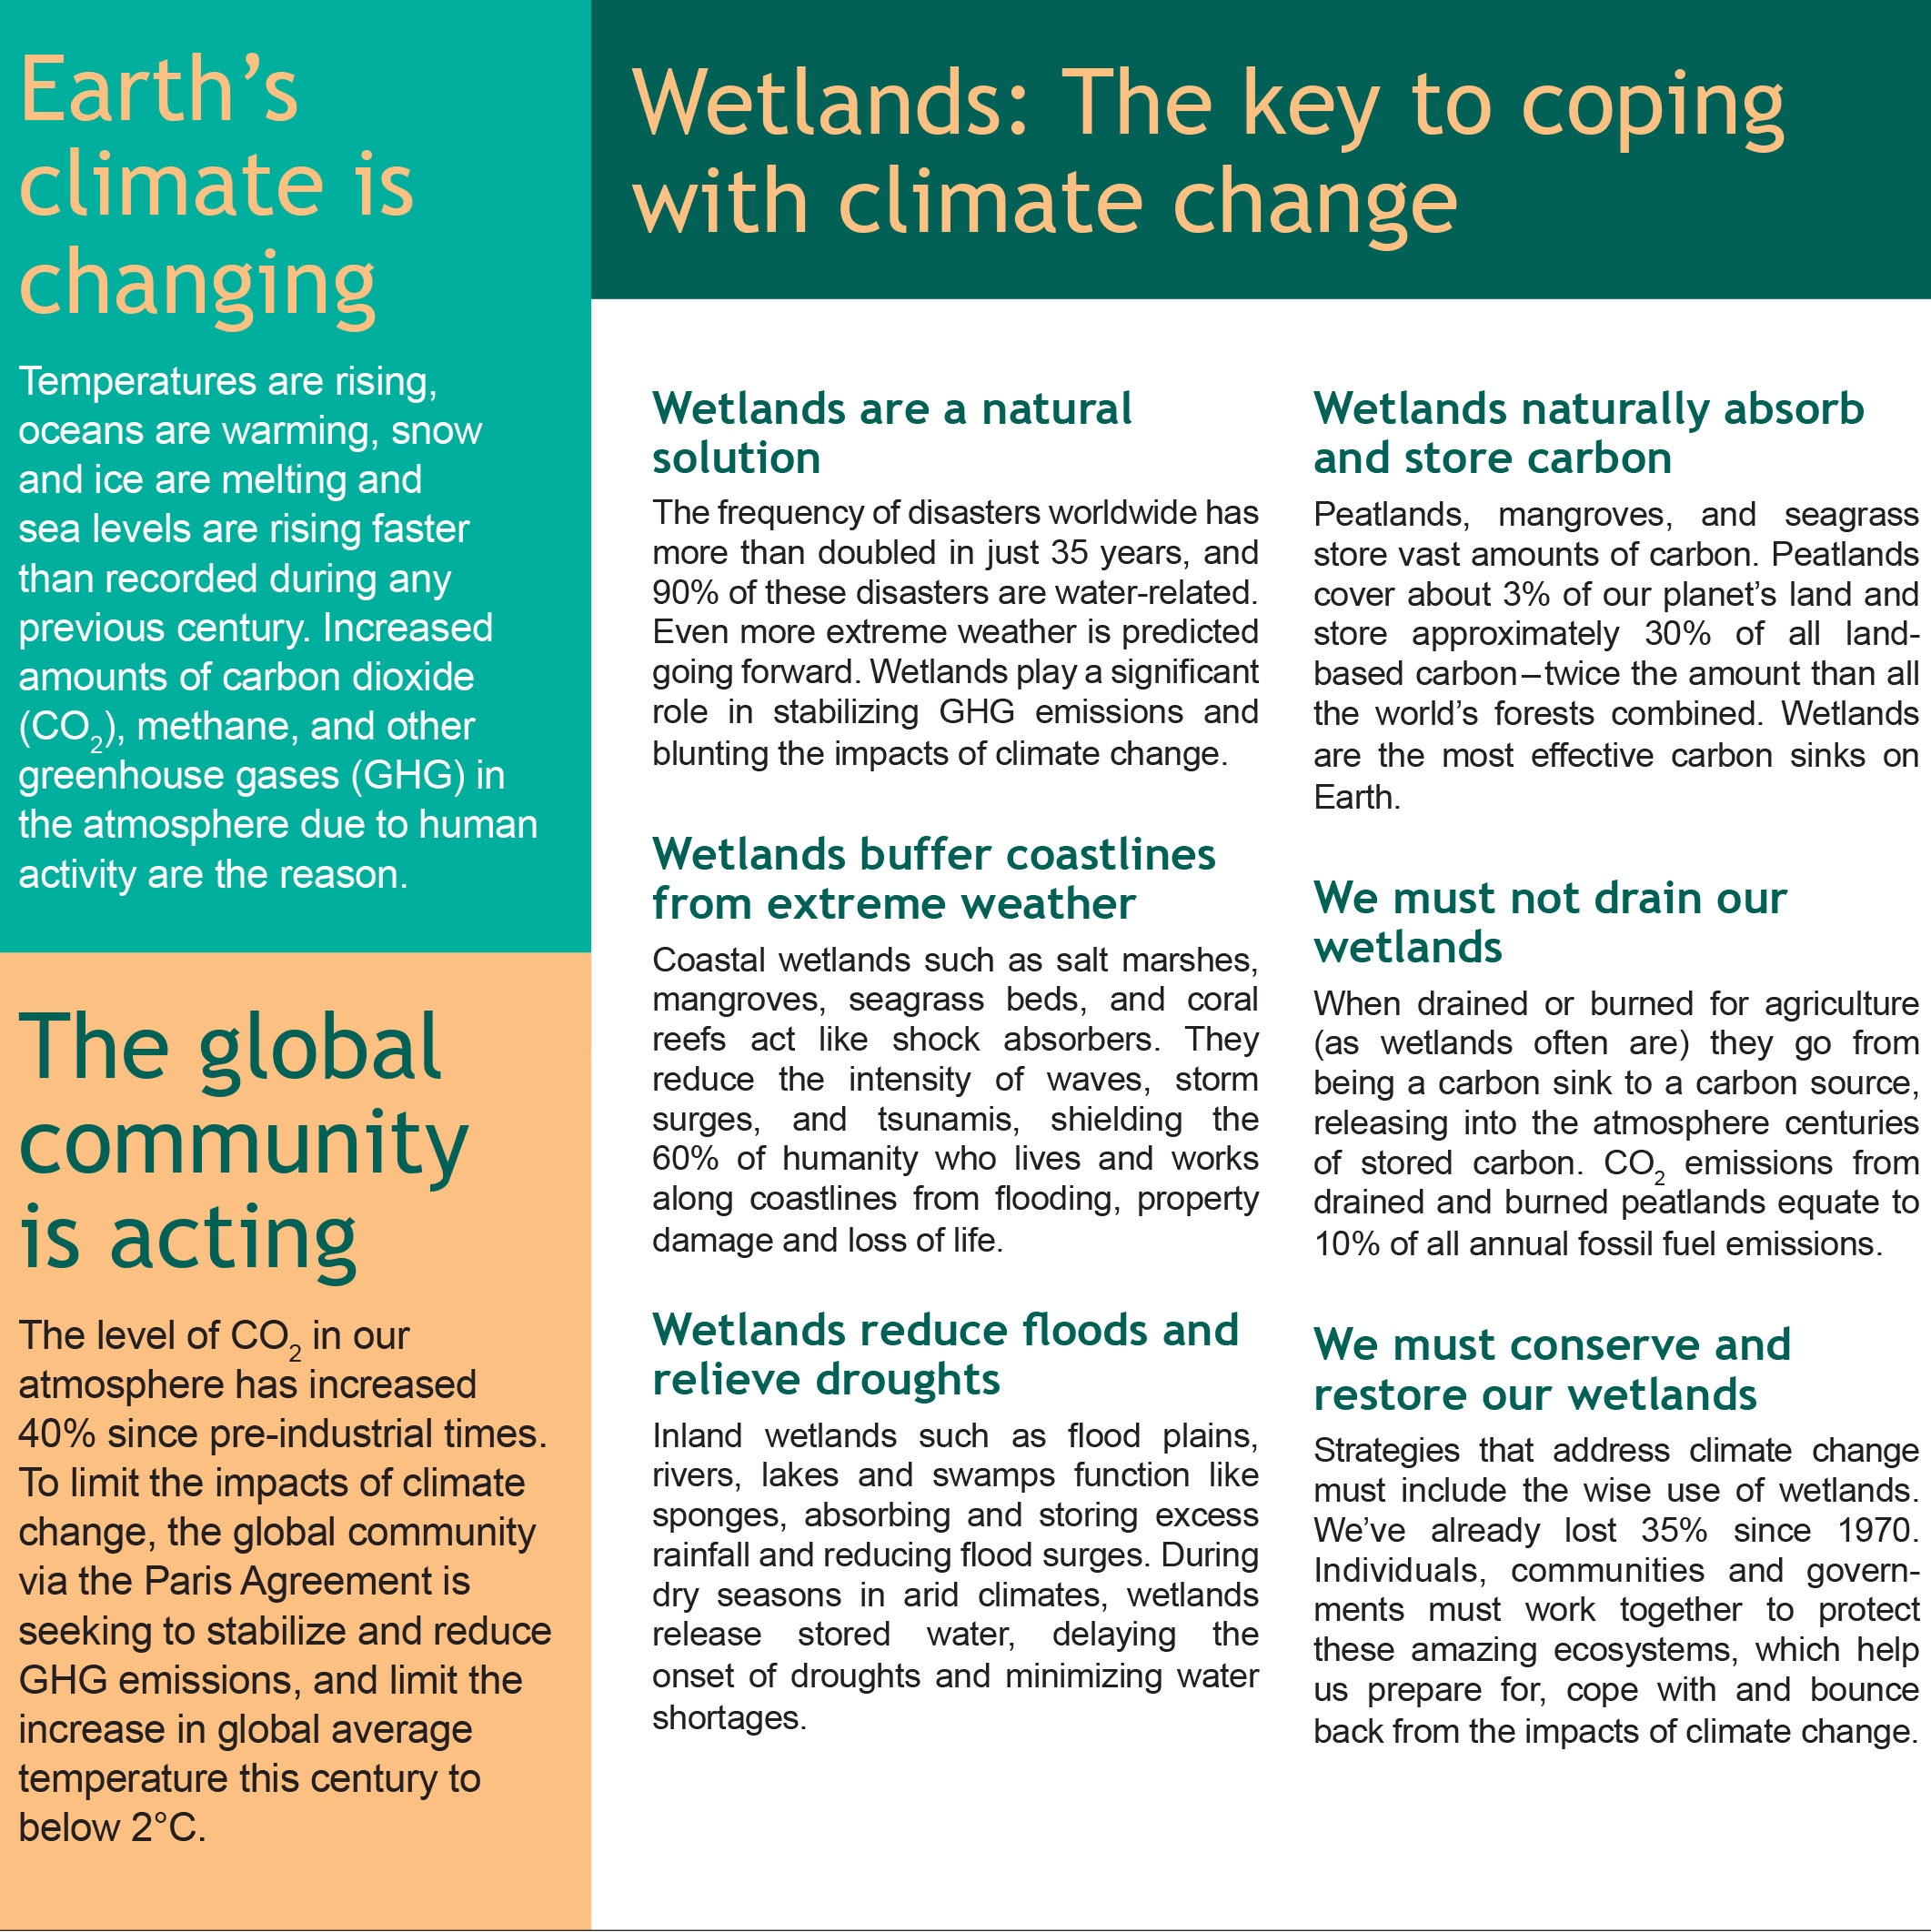 Wetlands the key coping with climate change